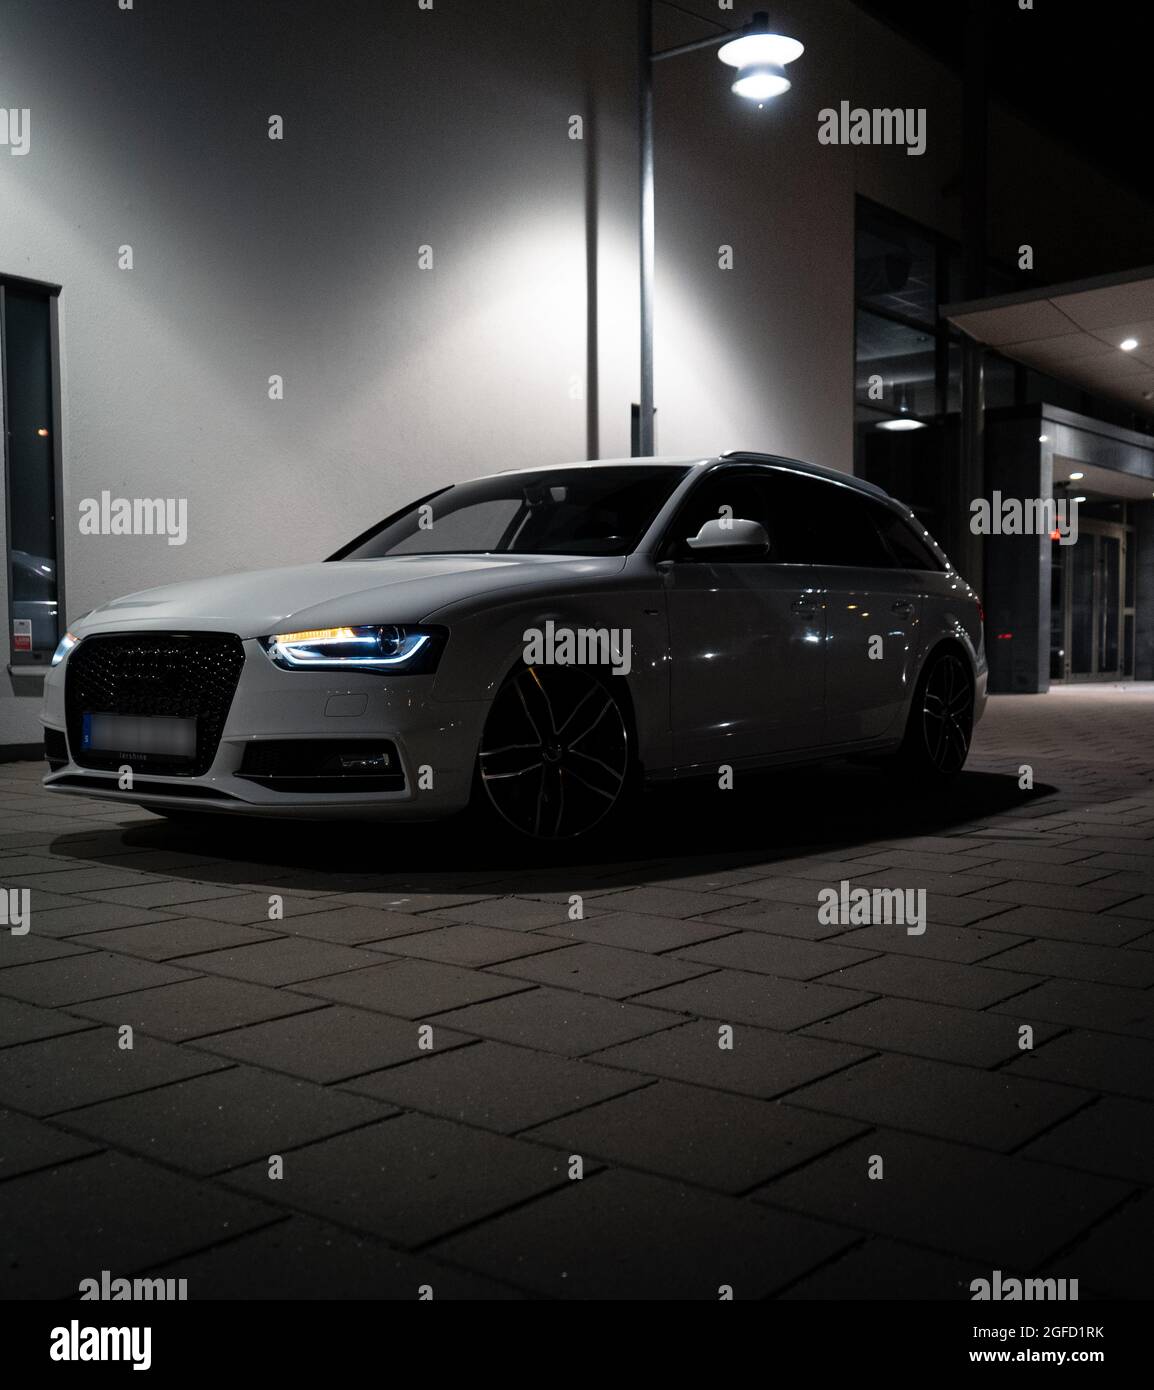 U, SWEDEN - Aug 05, 2021: The front part of white Audi A4 Avant with lit headlights outdoors at night Stock Photo